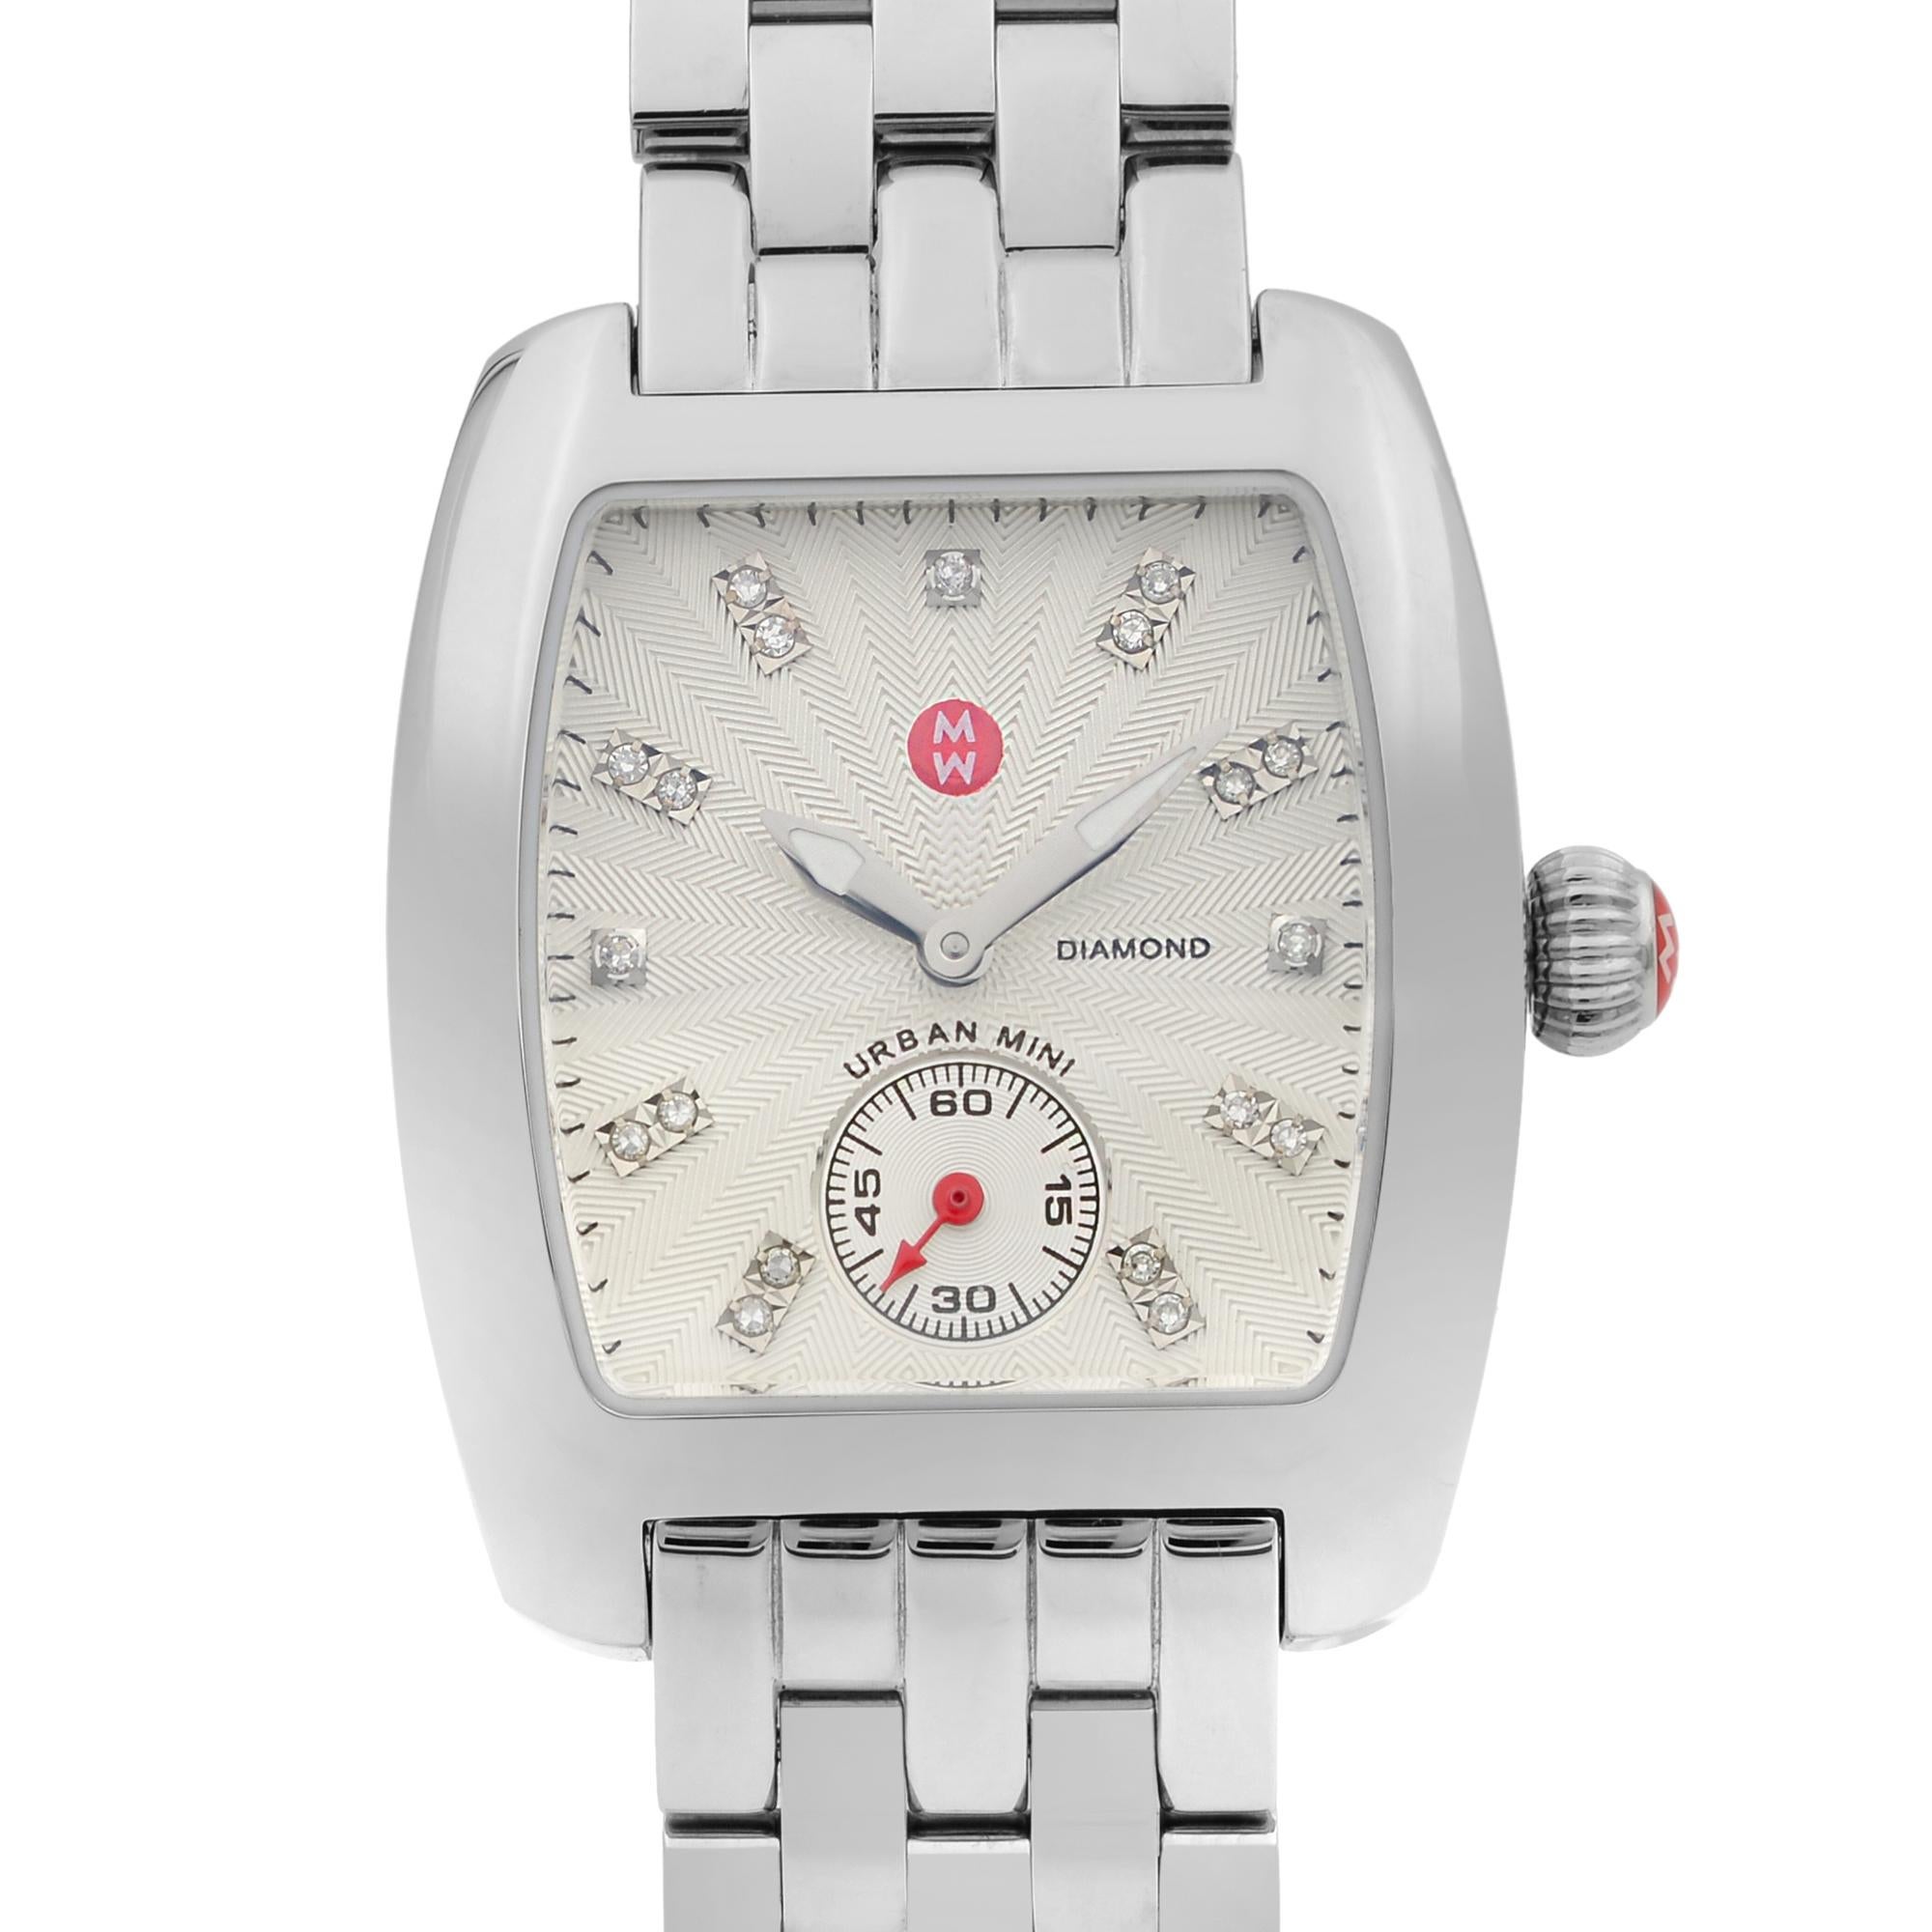 This New Without Tags Michele Urban Mini MWW02A000502 is a beautiful Ladie's timepiece that is powered by quartz (battery) movement which is cased in a stainless steel case. It has a tonneau shape face, small seconds subdial dial, and has hand